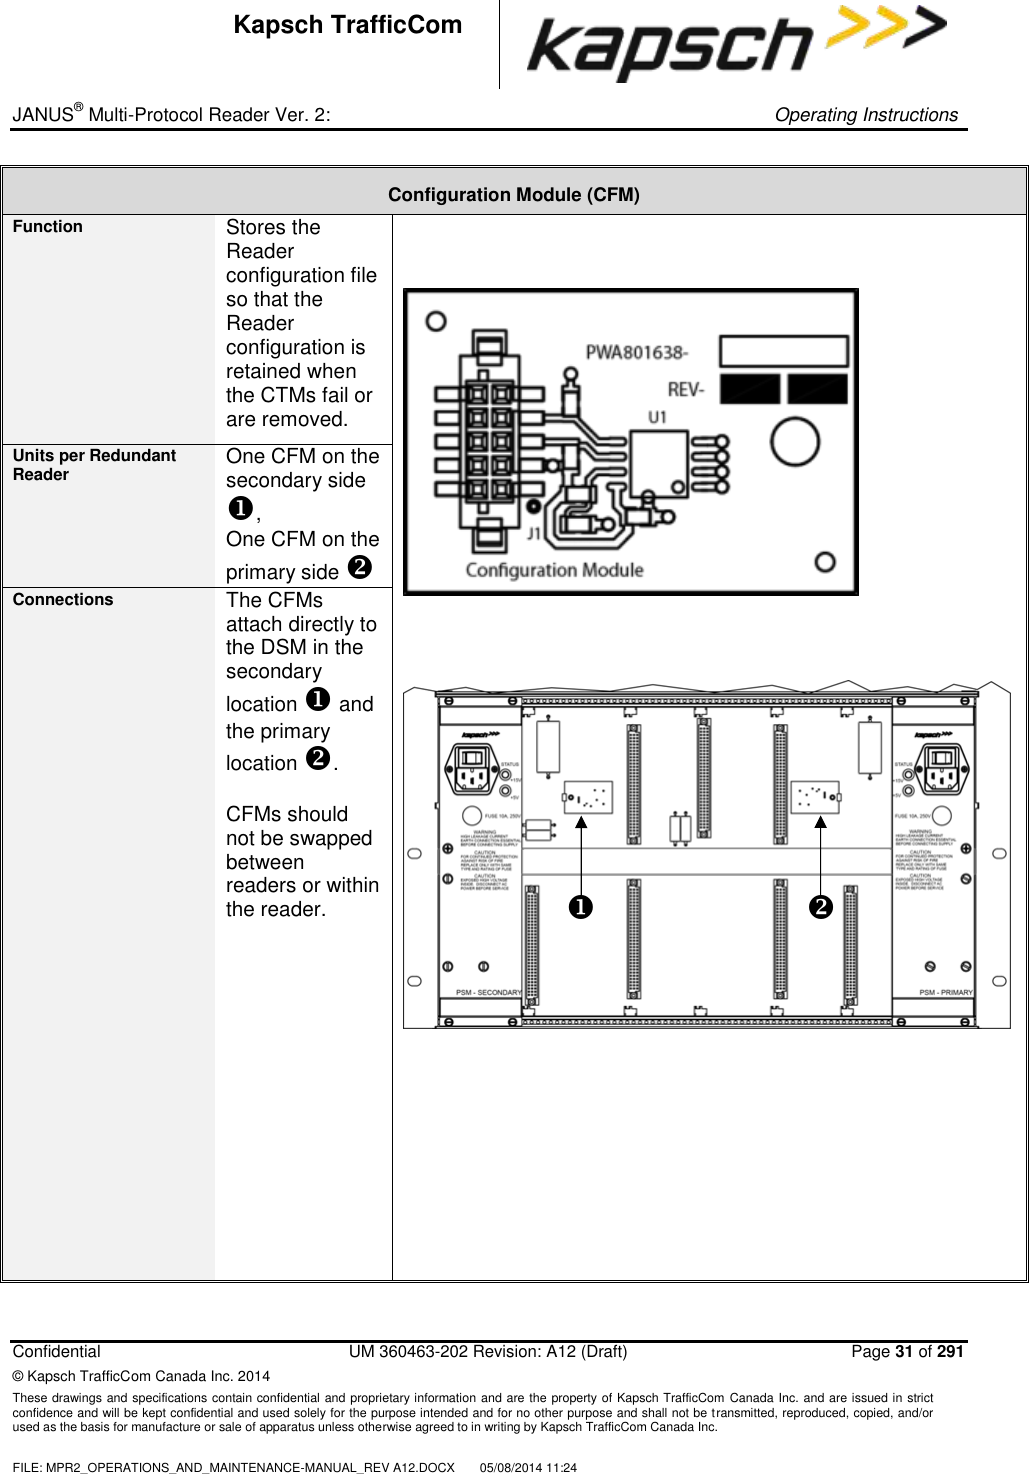 _ JANUS® Multi-Protocol Reader Ver. 2:     Operating Instructions  Confidential  UM 360463-202 Revision: A12 (Draft)   Page 31 of 291 © Kapsch TrafficCom Canada Inc. 2014 These drawings and specifications contain confidential and proprietary information and are the property of Kapsch TrafficCom  Canada Inc. and are issued in strict confidence and will be kept confidential and used solely for the purpose intended and for no other purpose and shall not be transmitted, reproduced, copied, and/or used as the basis for manufacture or sale of apparatus unless otherwise agreed to in writing by Kapsch TrafficCom Canada Inc.  FILE: MPR2_OPERATIONS_AND_MAINTENANCE-MANUAL_REV A12.DOCX  05/08/2014 11:24  Kapsch TrafficCom Configuration Module (CFM) Function Stores the Reader configuration file so that the Reader configuration is retained when the CTMs fail or are removed.        Units per Redundant Reader One CFM on the secondary side , One CFM on the primary side  Connections The CFMs attach directly to the DSM in the secondary location  and the primary location .  CFMs should not be swapped between readers or within the reader.       